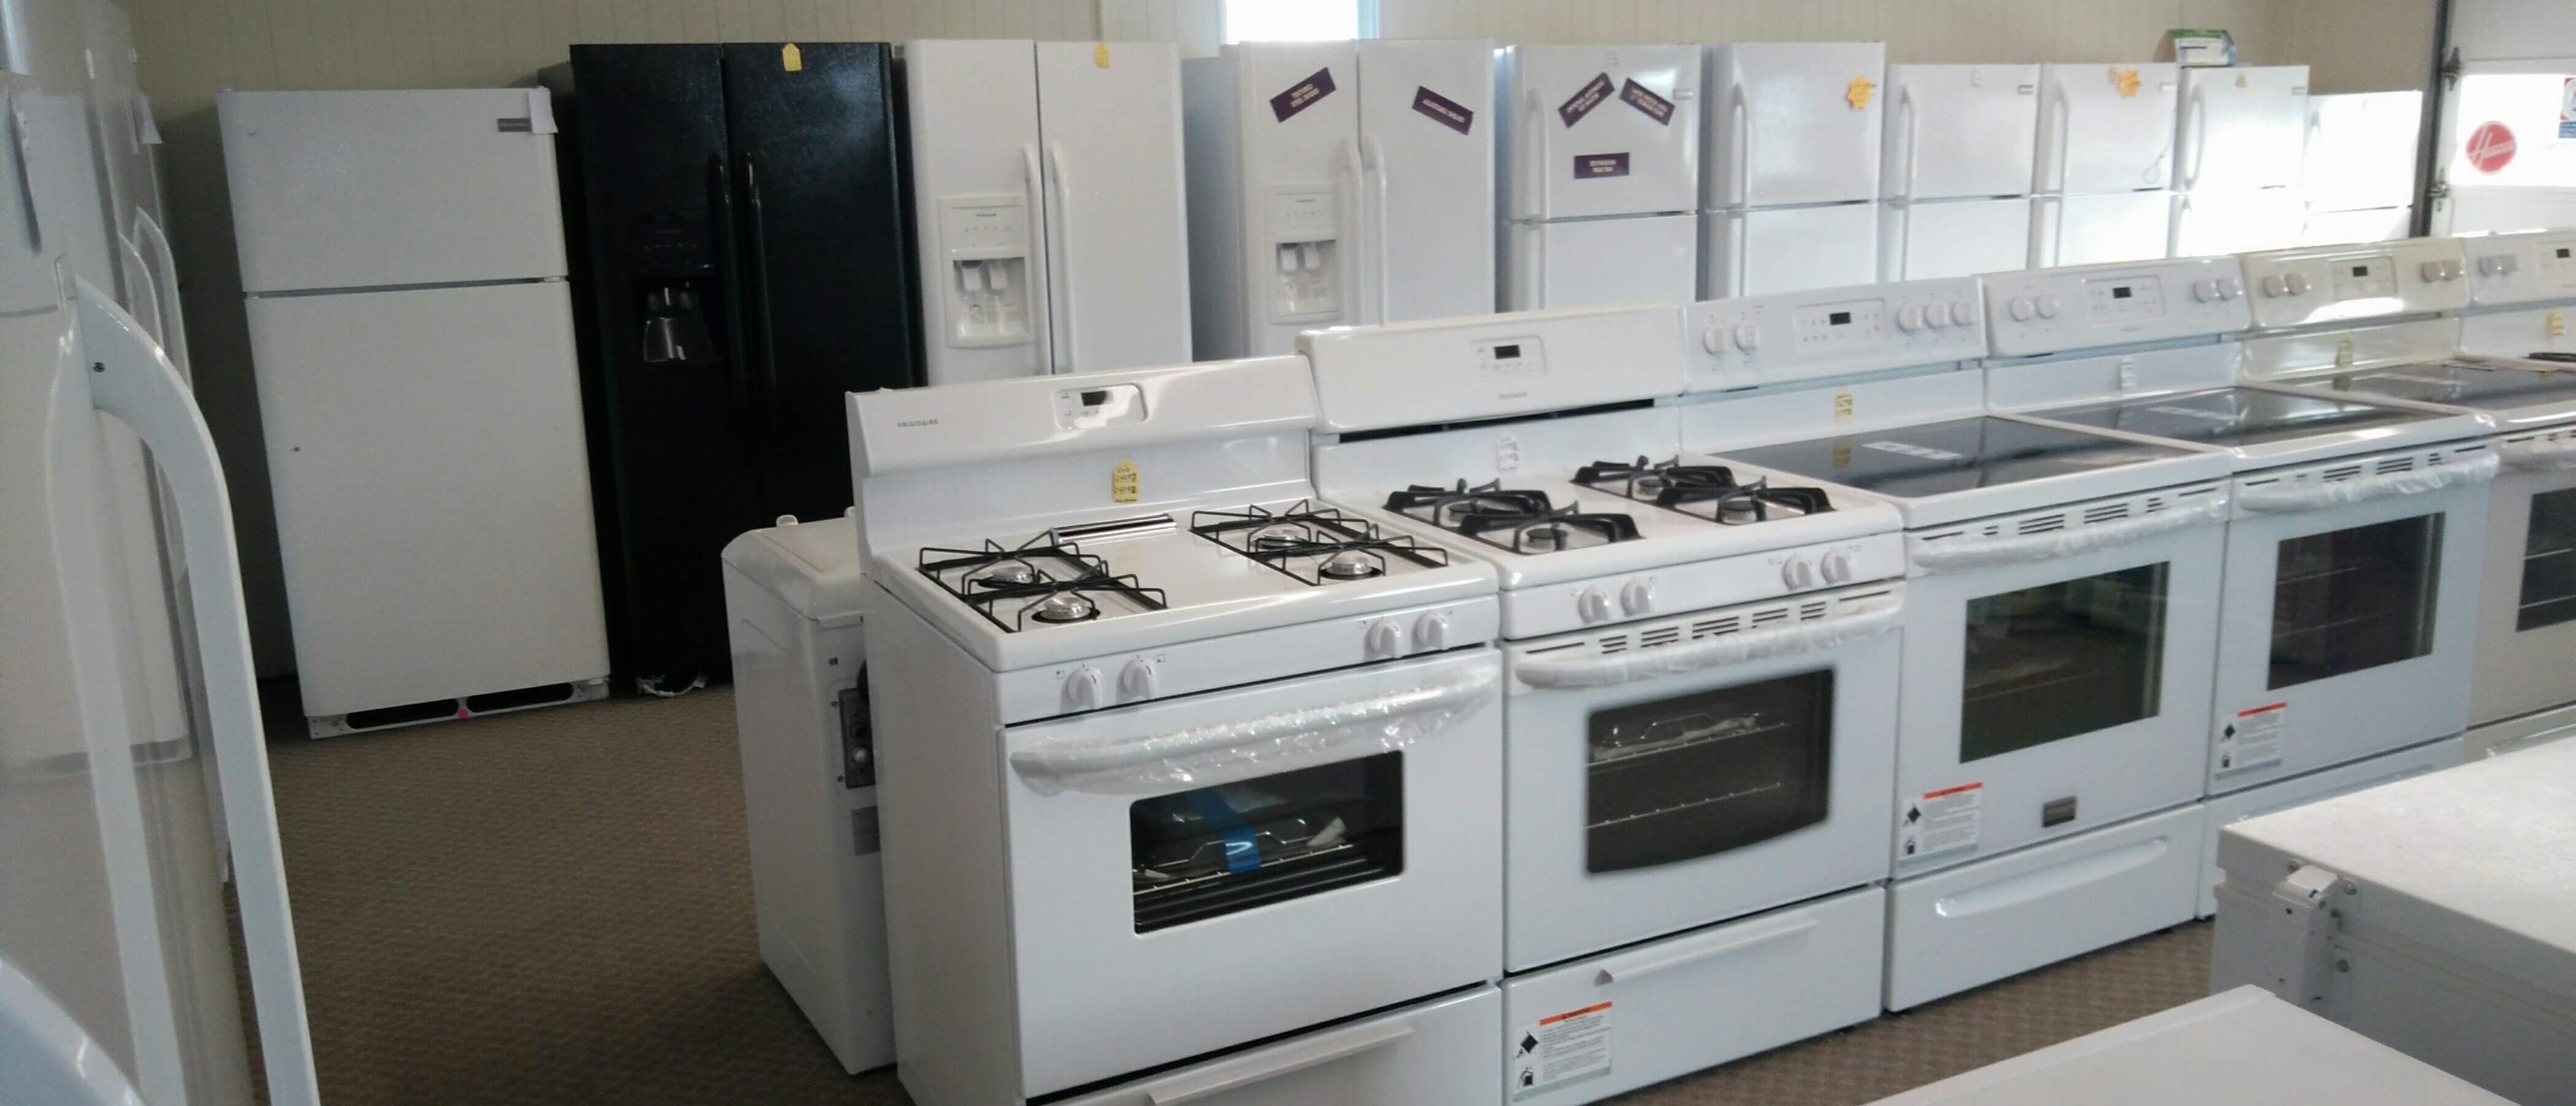 Many stoves and refrigerators in in orderly rows inside the Christman Appliances store